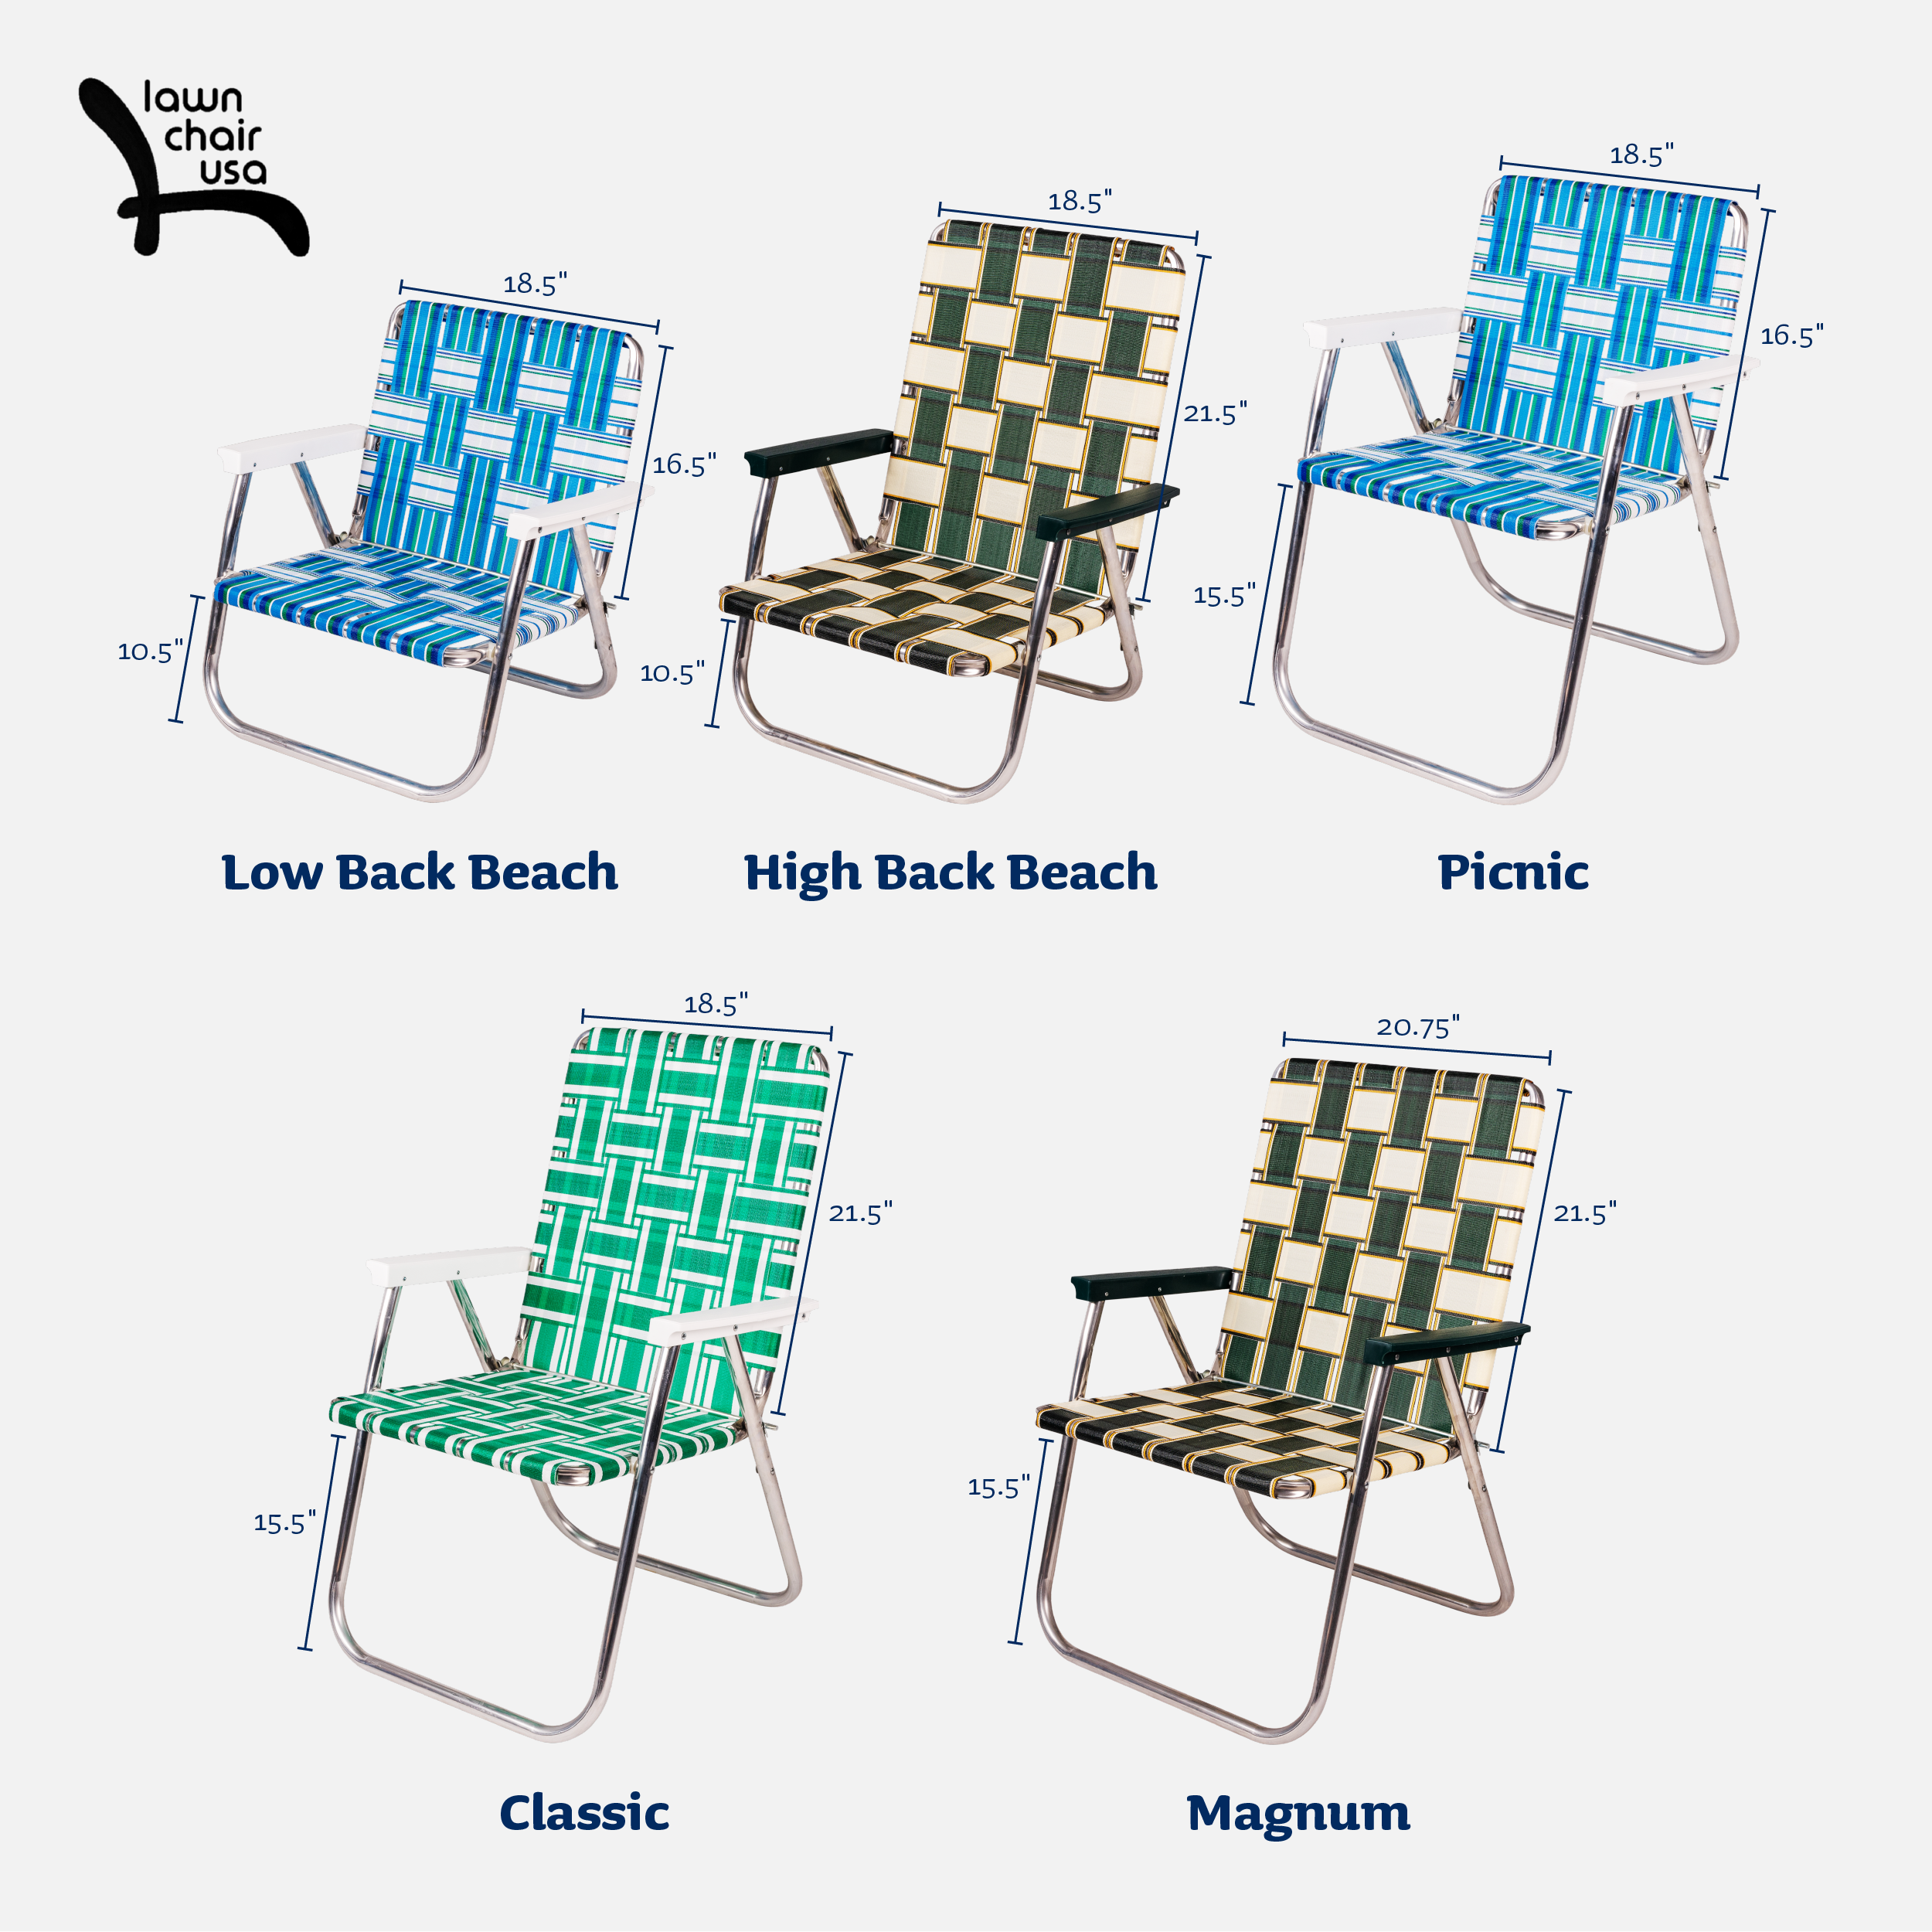 Free Shipping - Aluminum Webbed Lawn Chairs | Lawn Chair USA